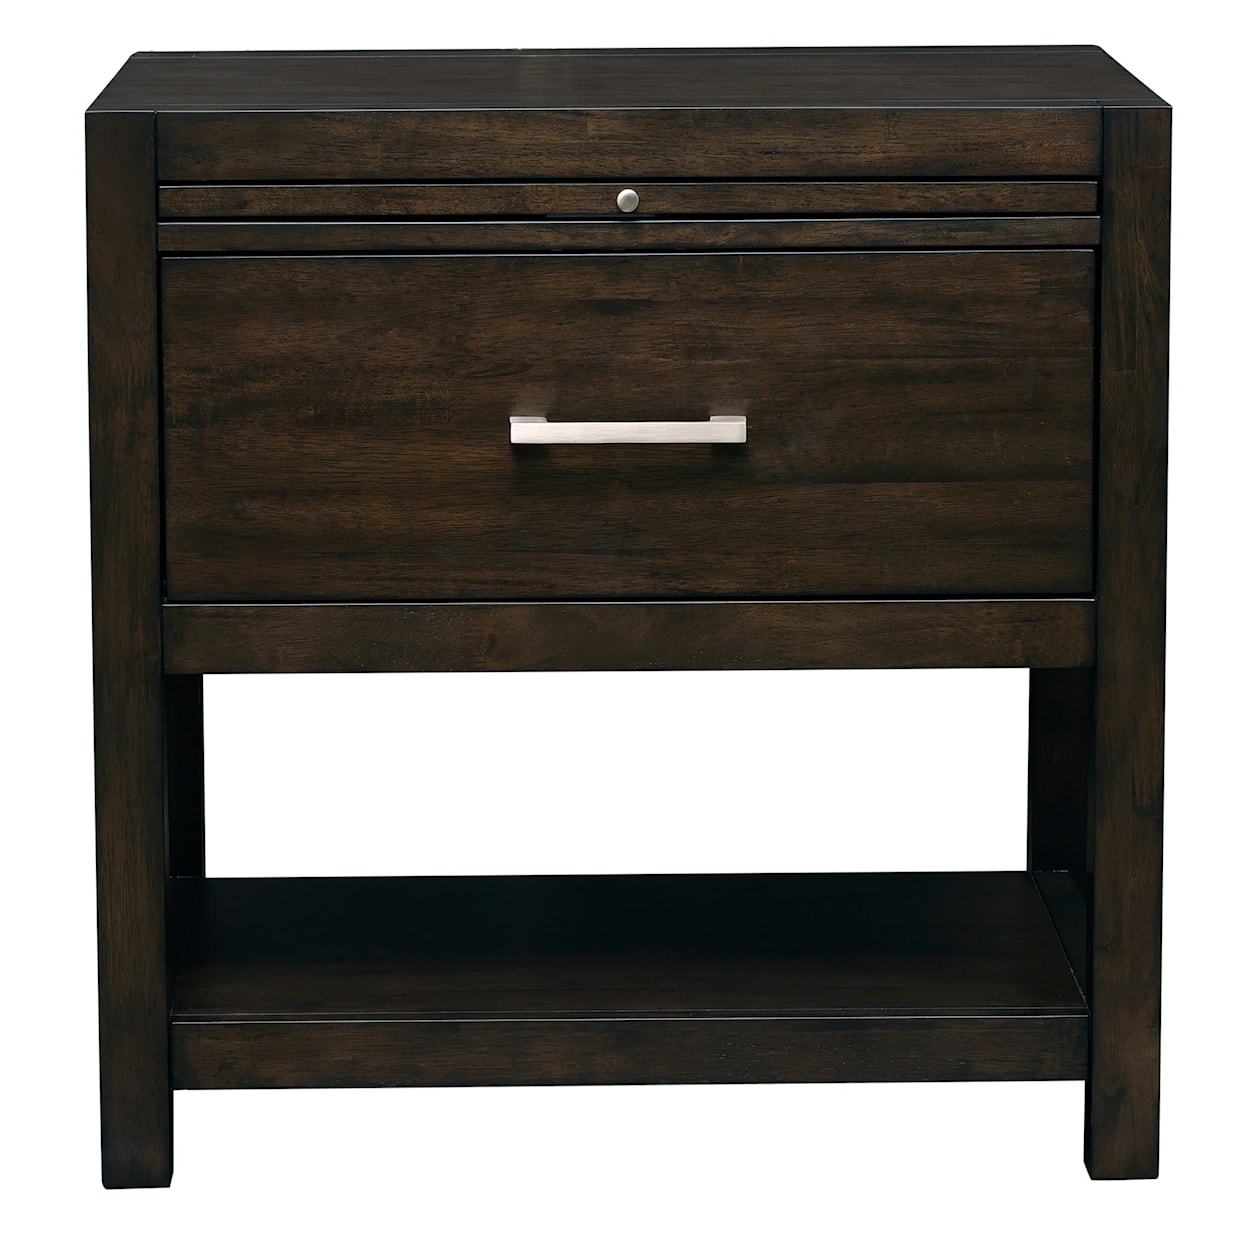 AAmerica Kenzie Nightstand with Pull-out